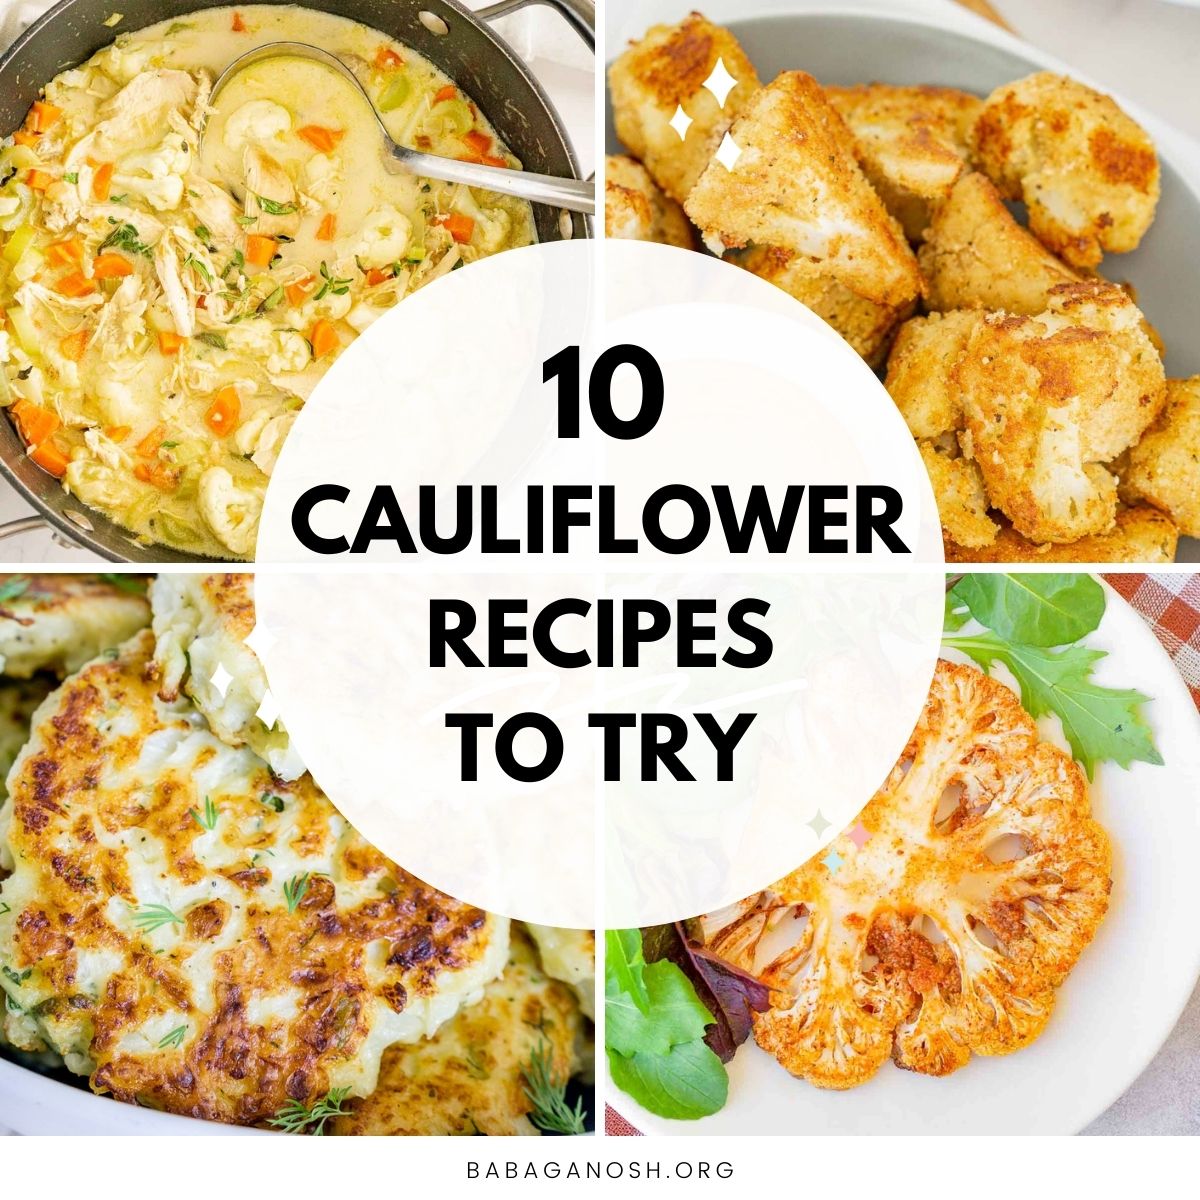 Image with text: 10 Cauliflower Recipes to Try